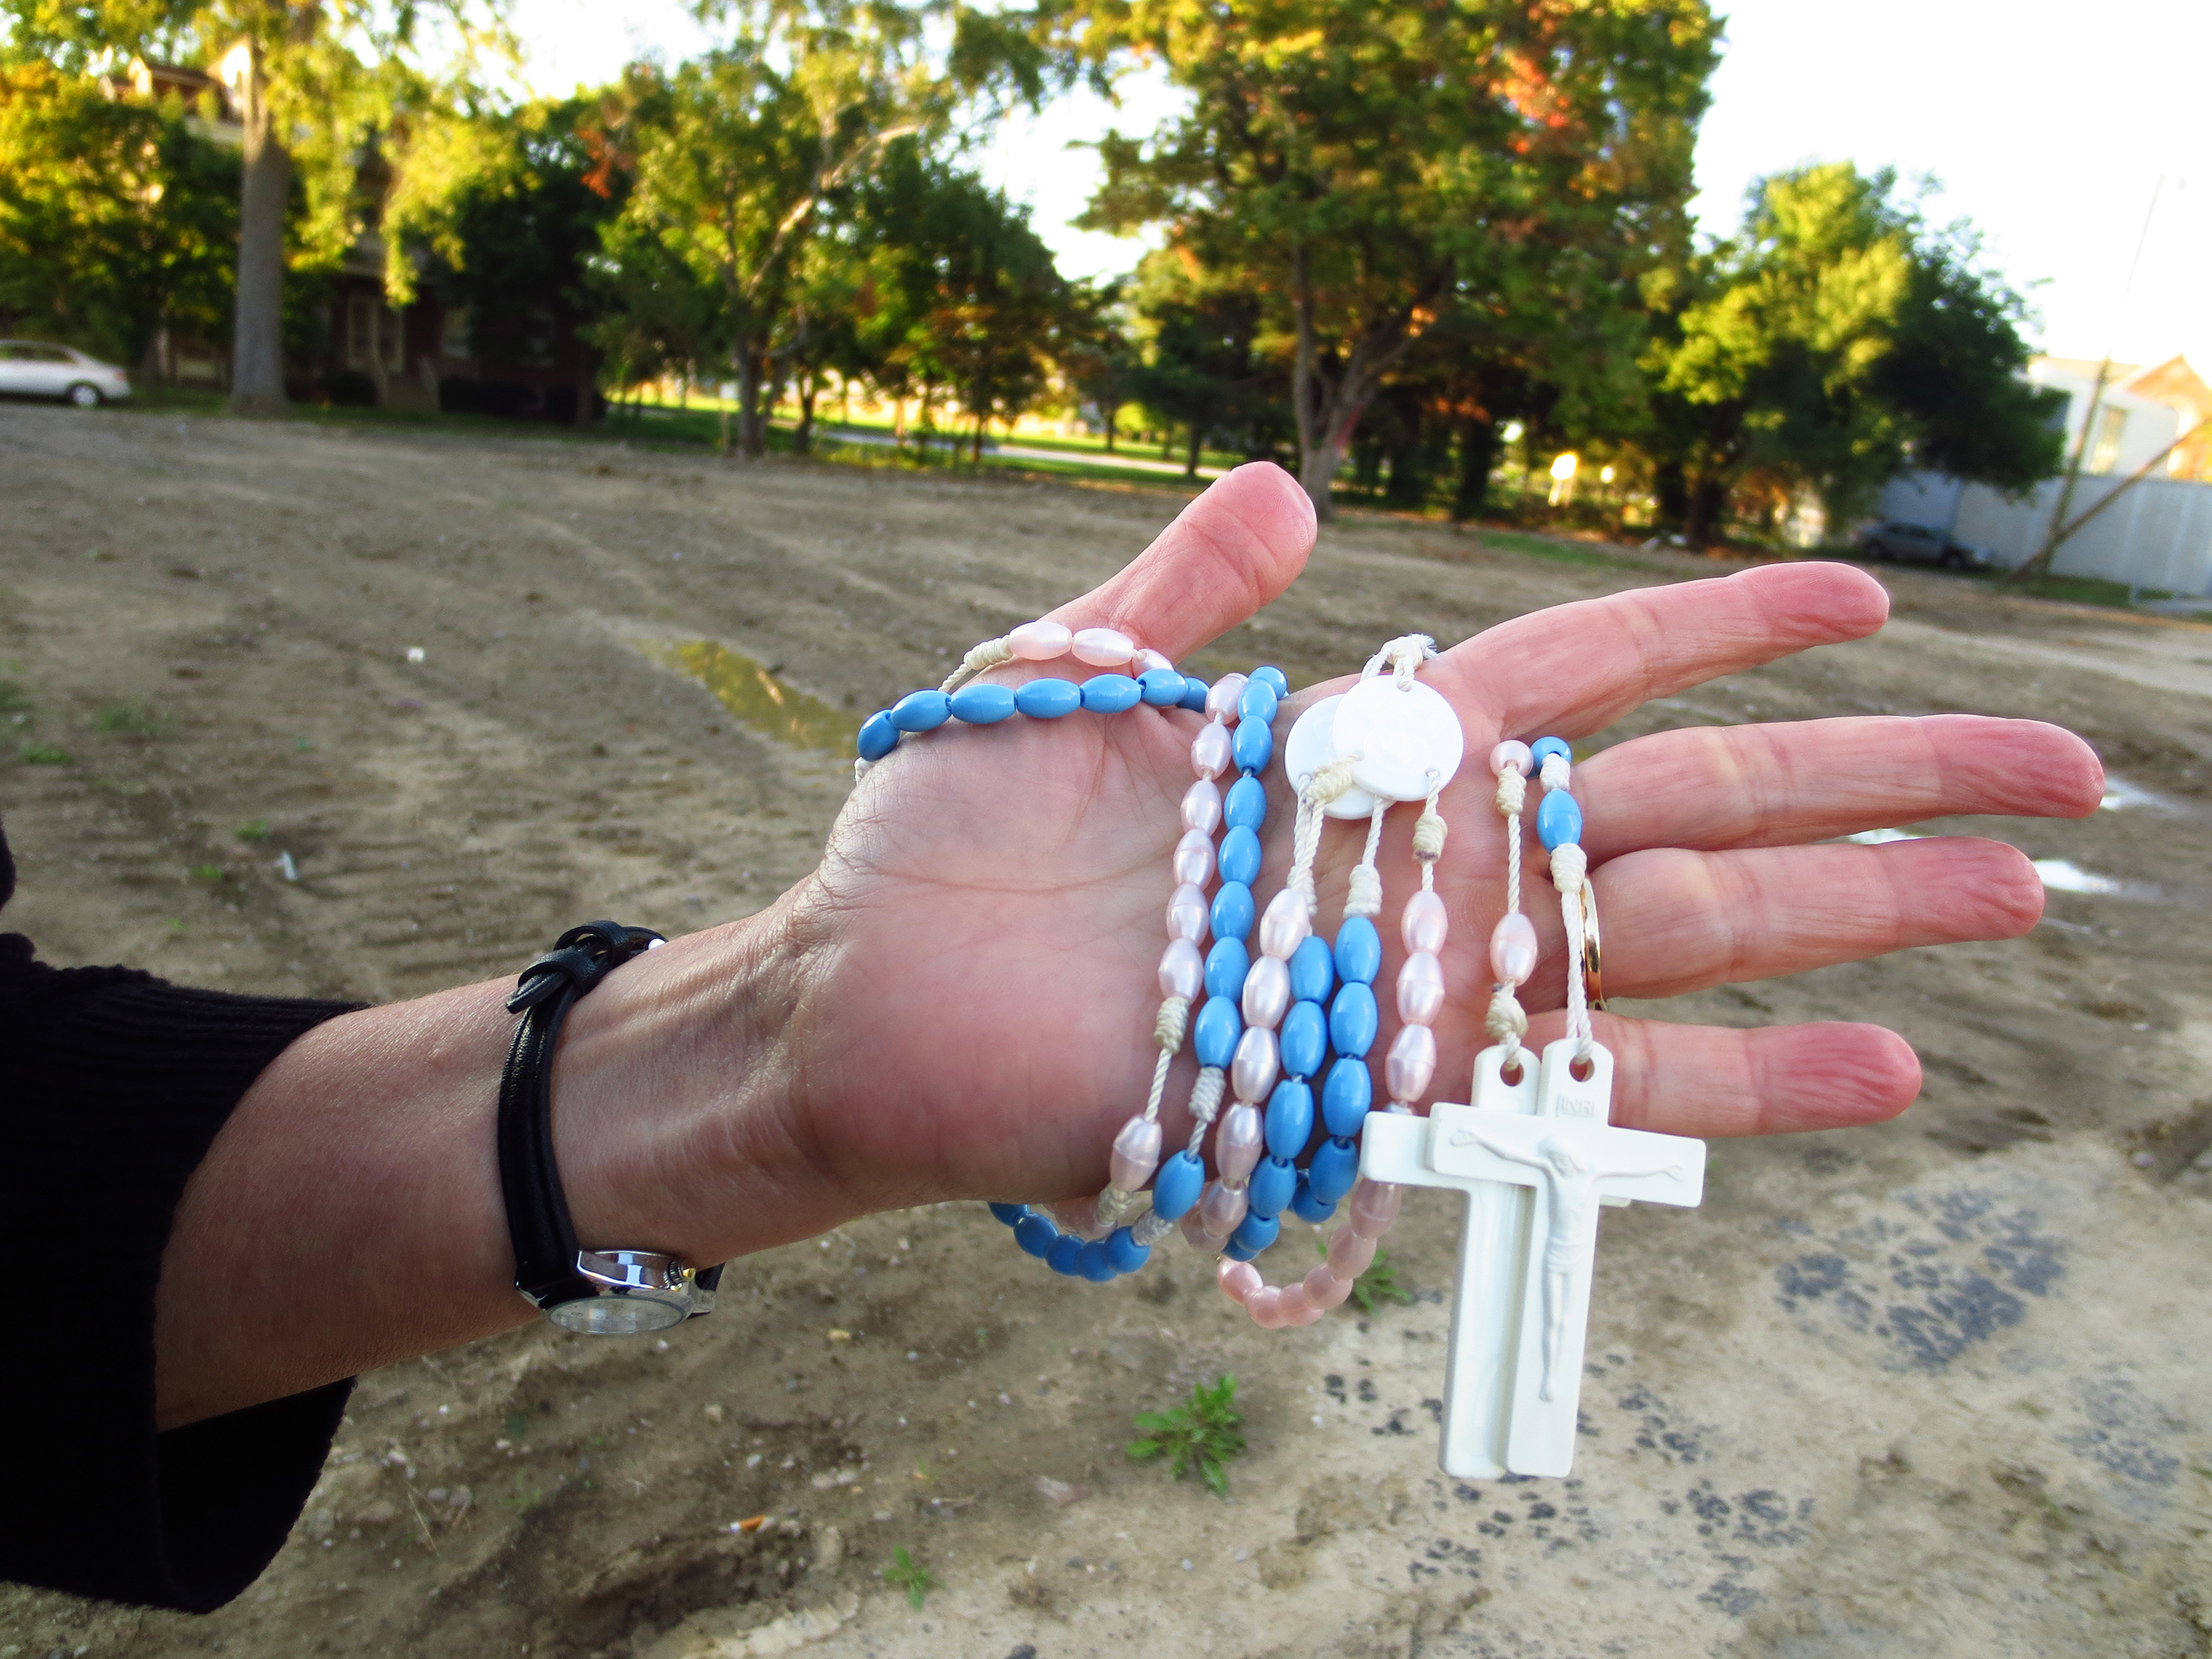 Pro-life activist Ann Barrick holds rosaries Sept. 26 while standing on the former site of the Center for Choice abortion clinic in Toledo, Ohio. These are the pink and blue rosaries she used while praying outside the clinic, which was closed in 2013 and torn down this September. The property is slated to be converted into a memorial for the unborn called "Hope Park." (CNS photo/Katie Breidenbach)